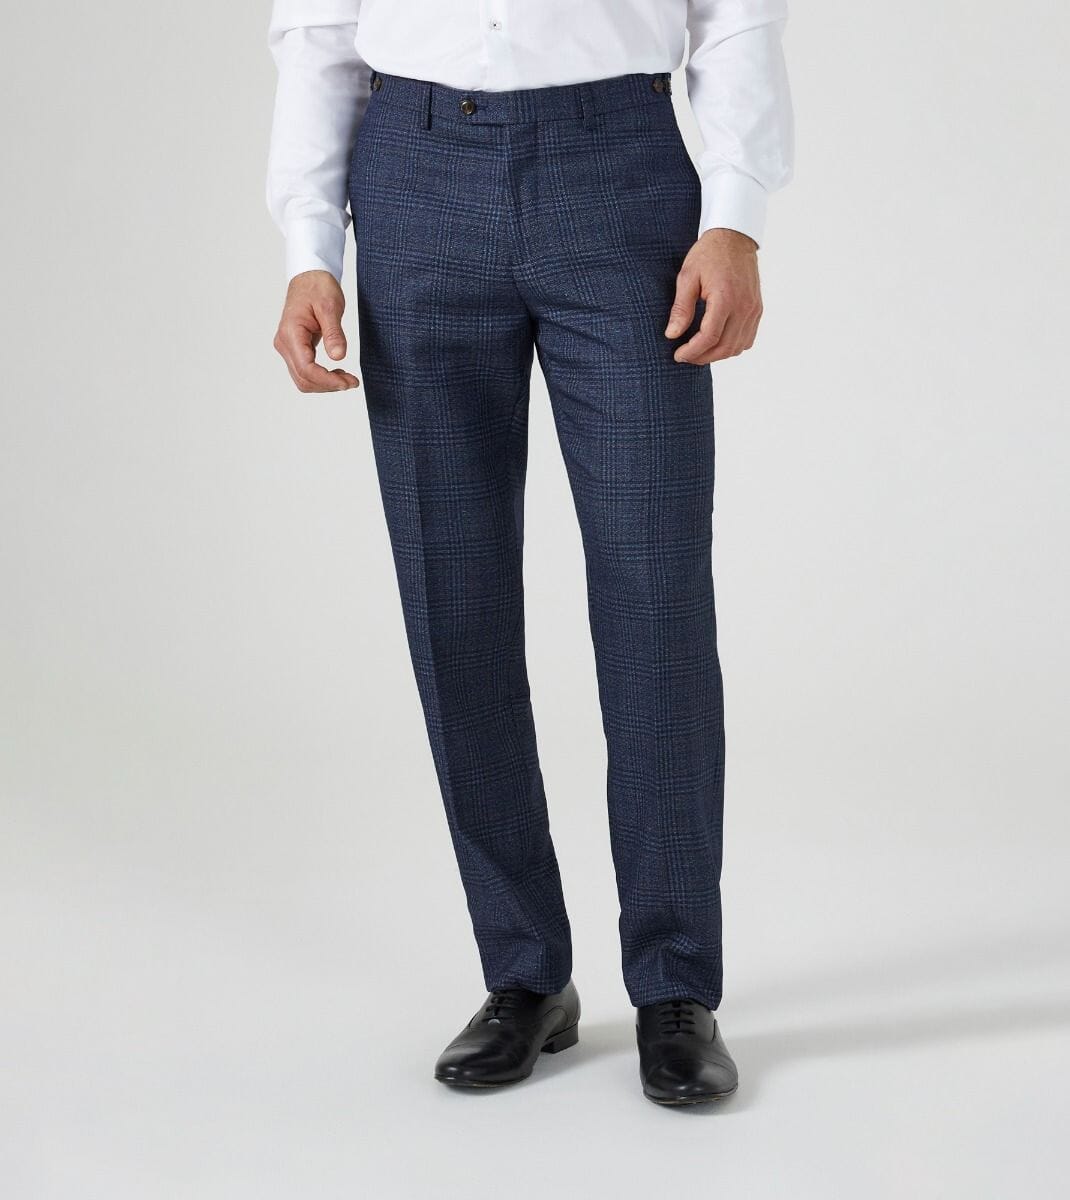 Woolf Blue Check Trousers - Trousers - 28R - THREADPEPPER